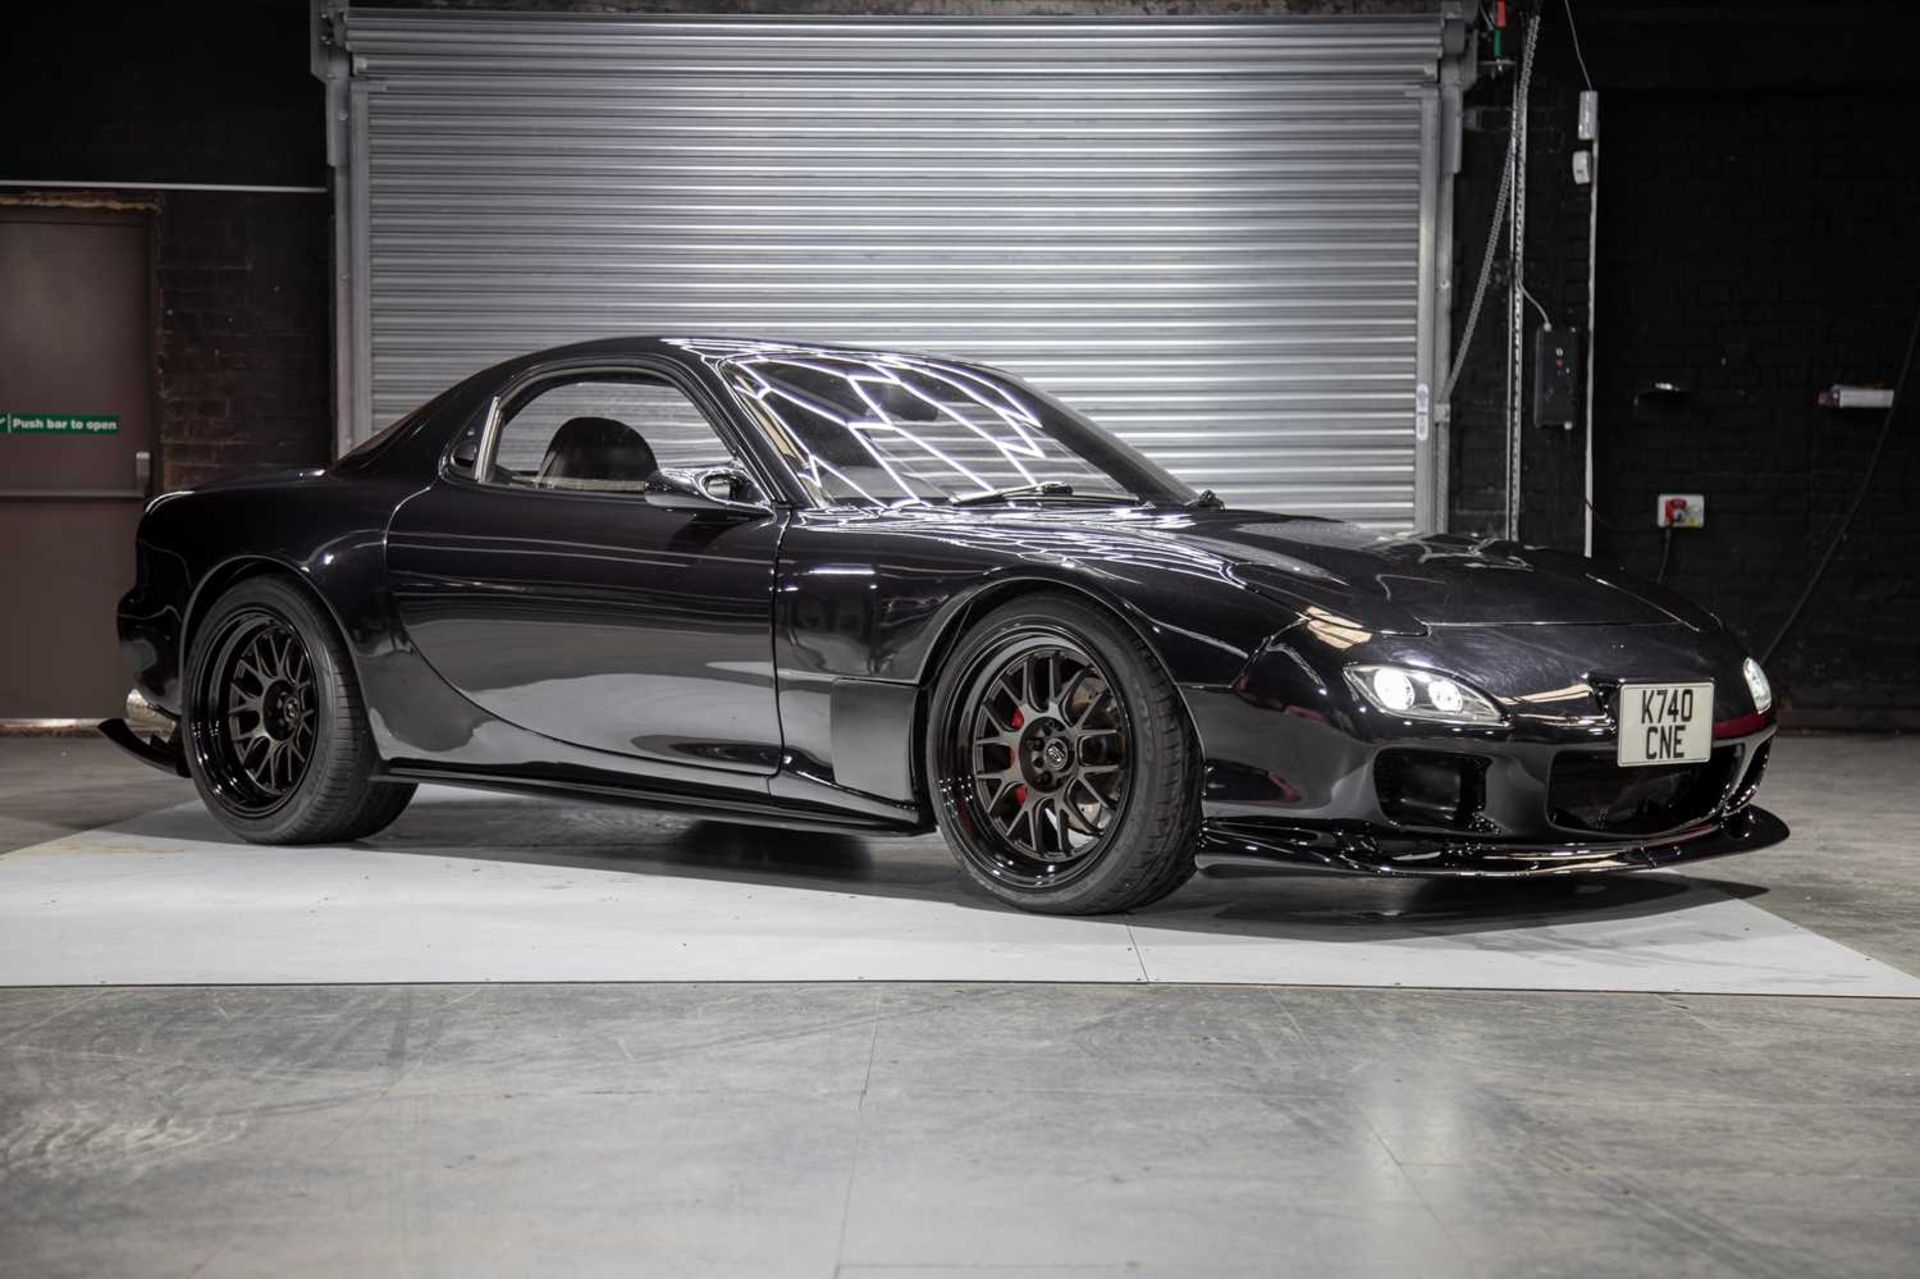 1993 Mazda RX7 FD Efini UK registered since 2003 and the subject of a major restoration and upgrade 